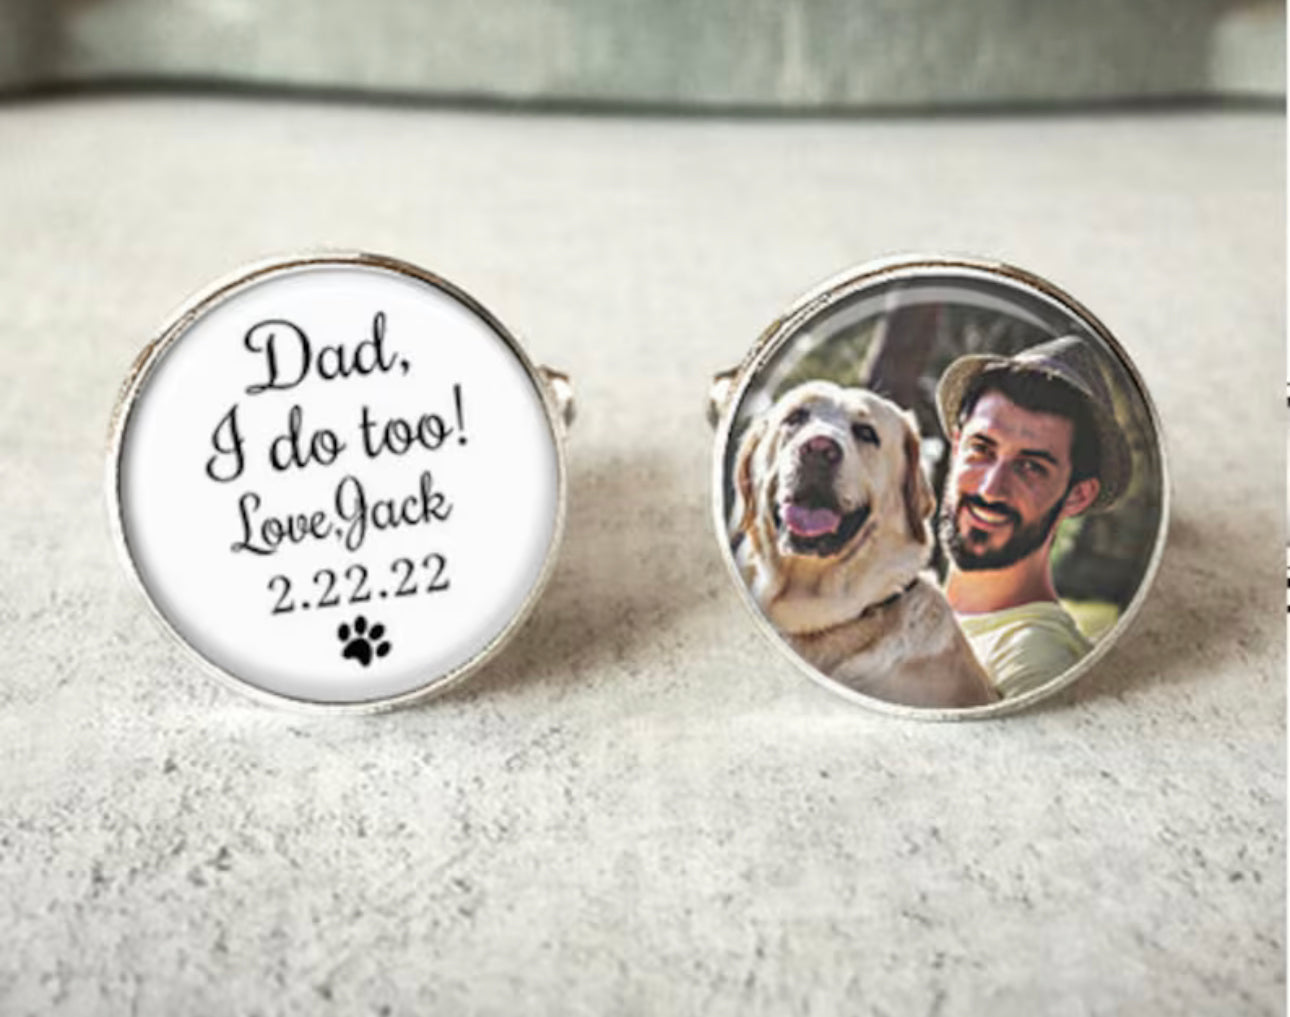 Personalized Cufflinks Groom Carry the Memory of Your Loved Ones